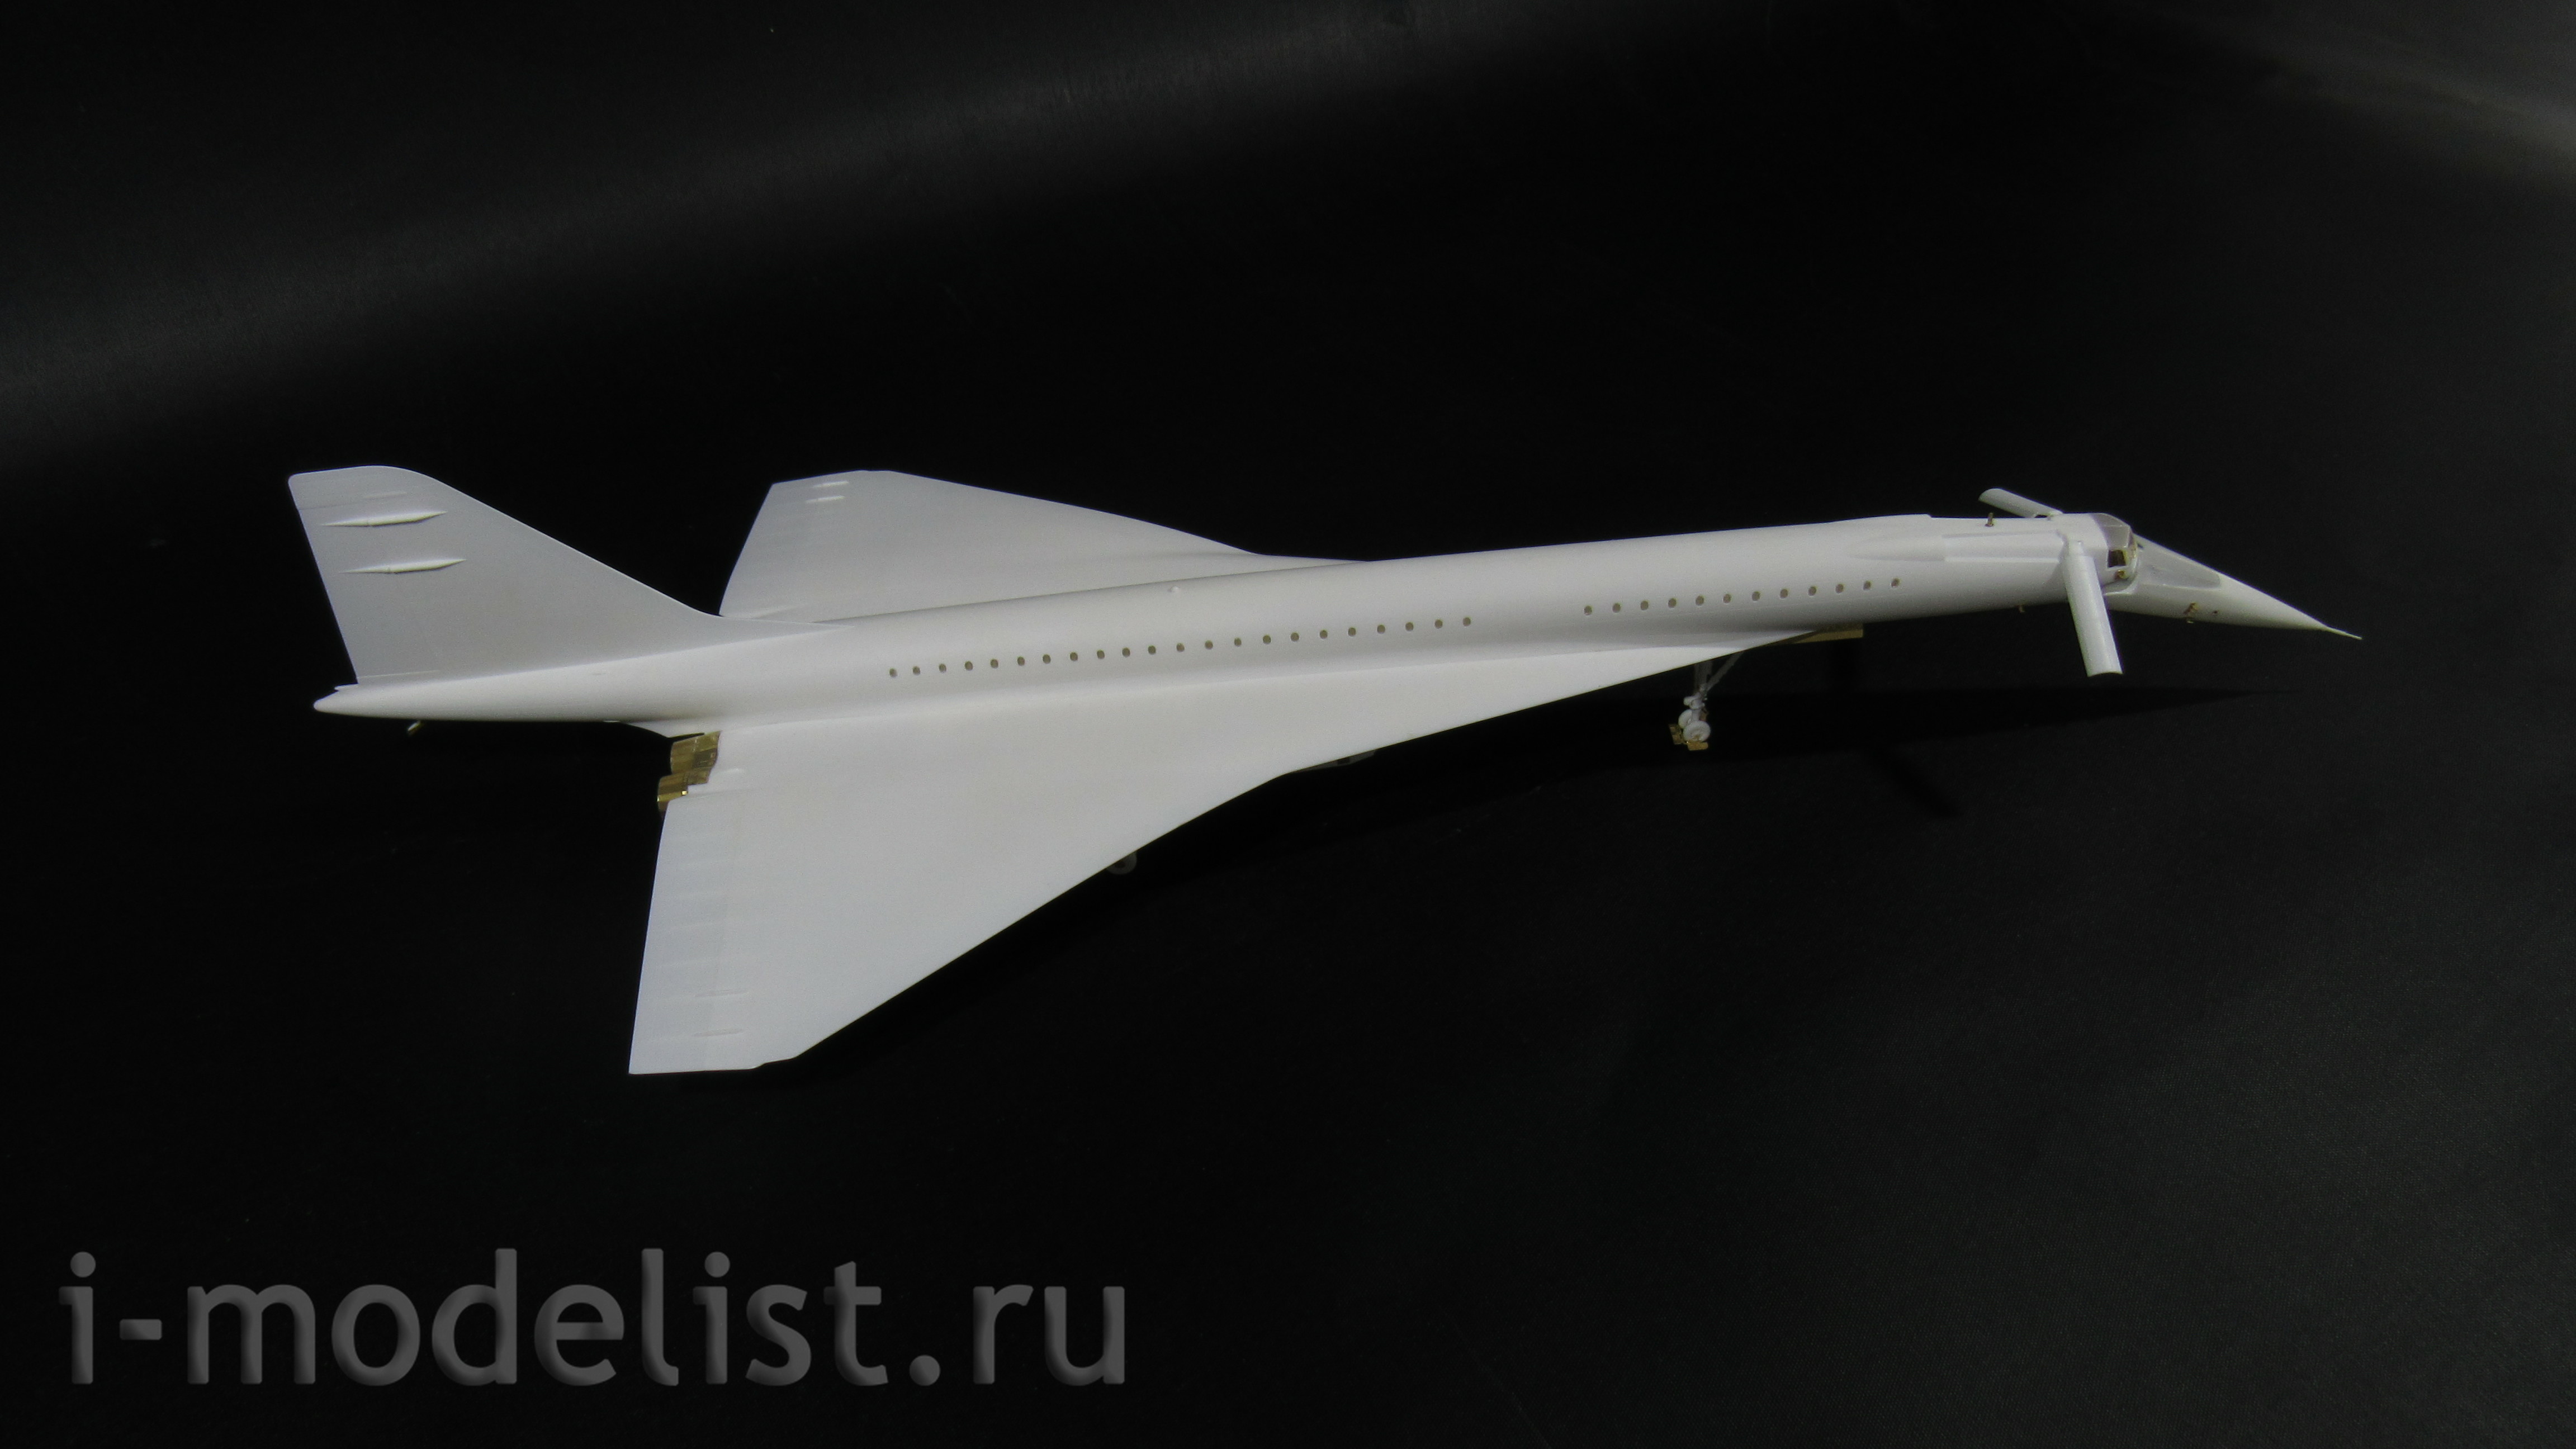 144229 Microdesign 1/144 photo etching kit for the Tu-144 model (exterior) from ICM